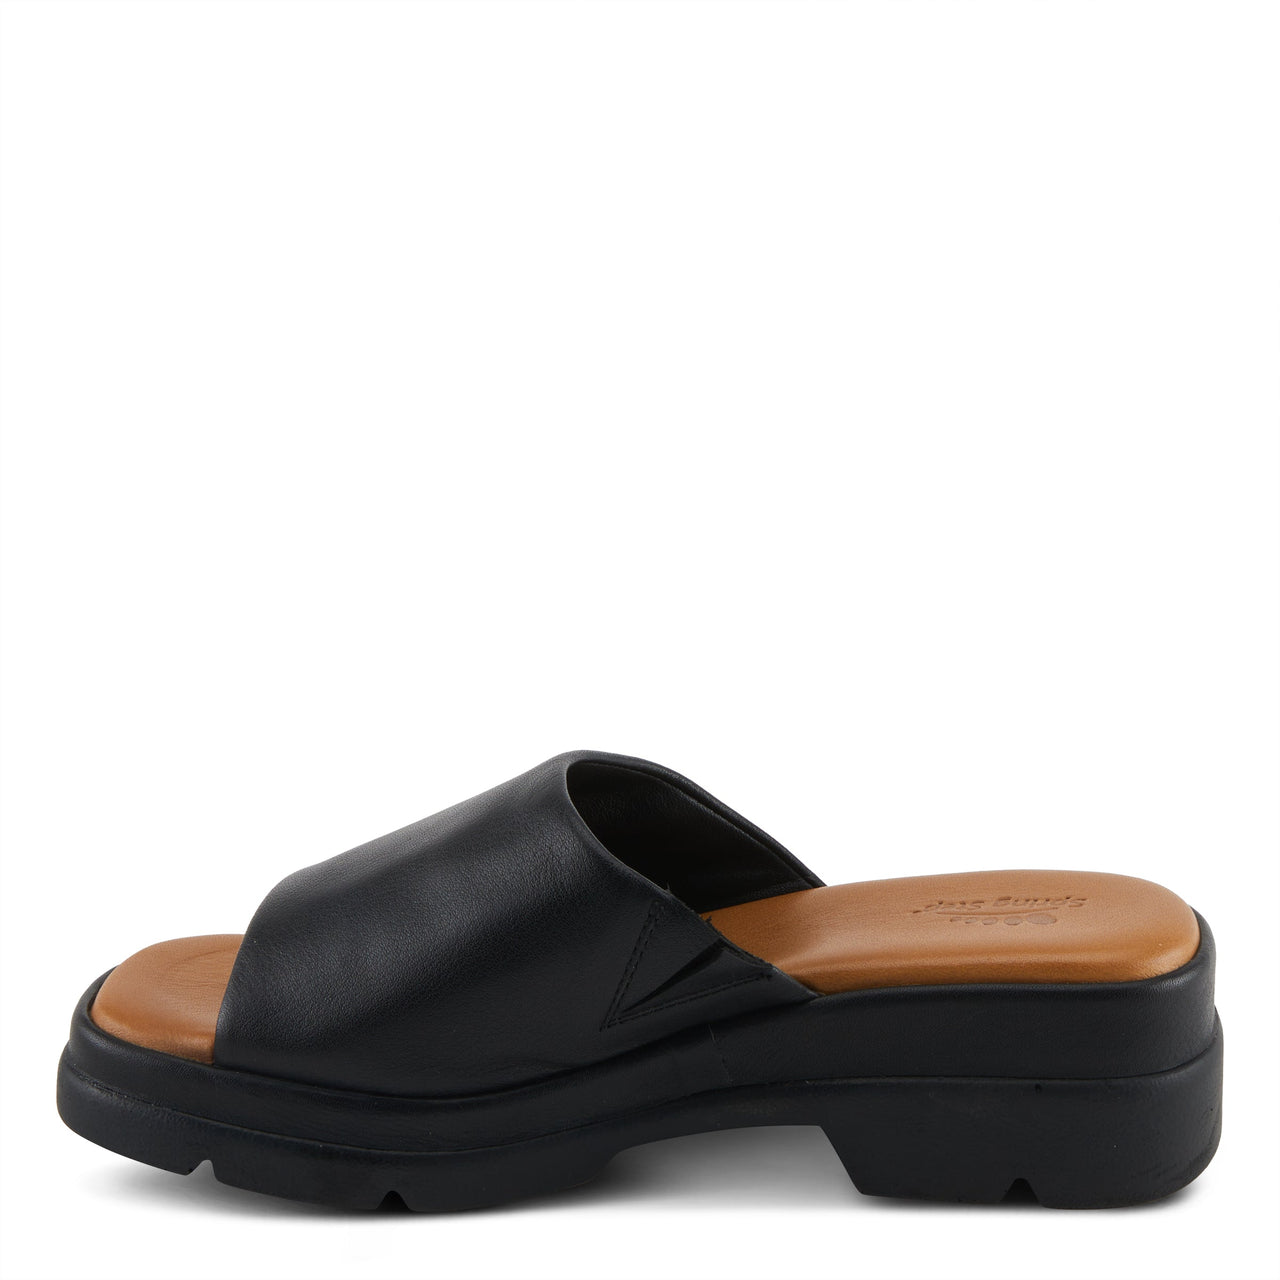 Pair of women's black leather Spring Step Fireisland sandals with comfortable cushioned footbed and adjustable buckle strap